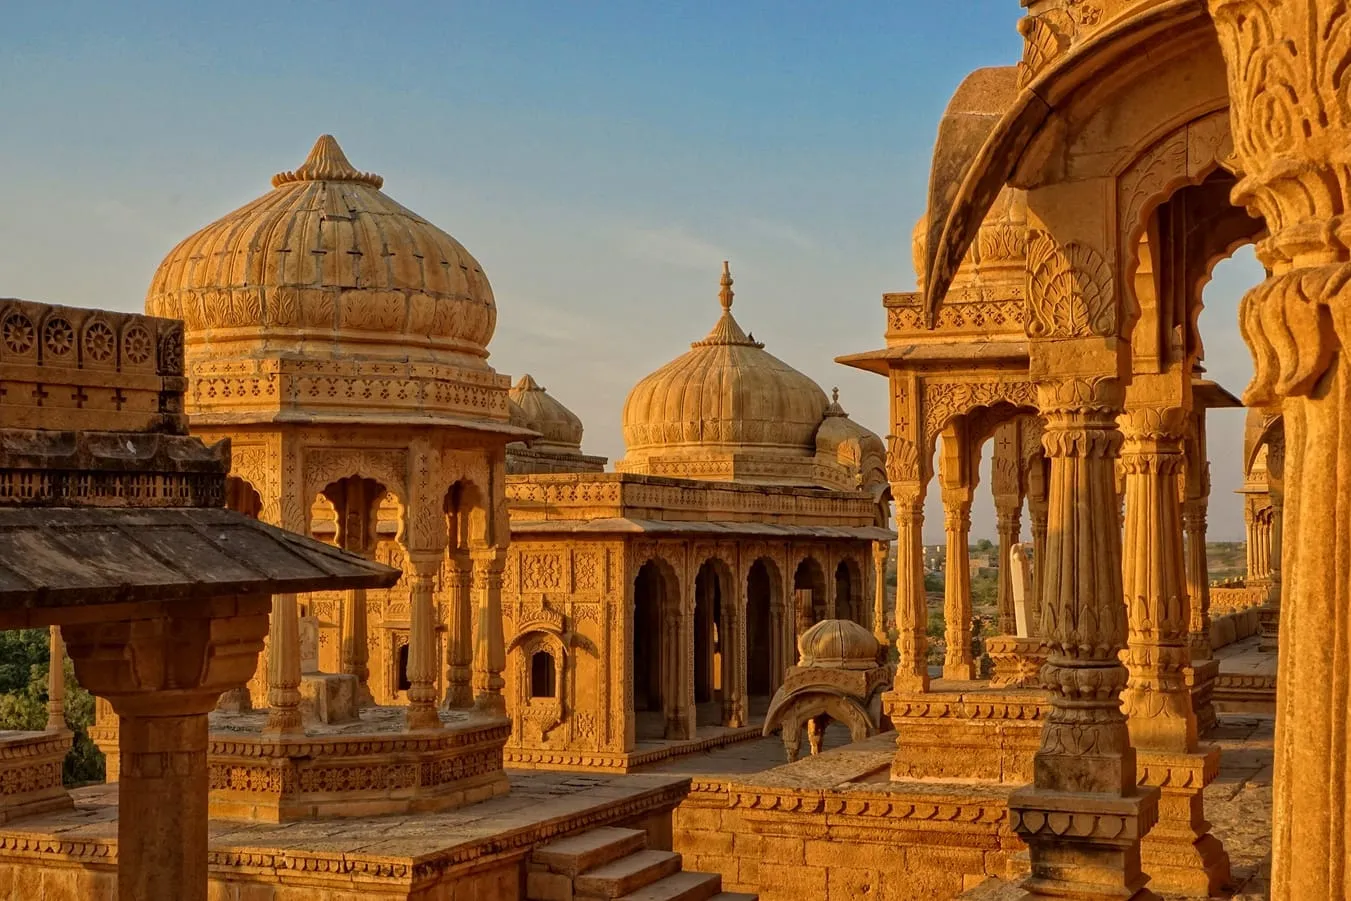 Looking For a budgeted tour to Rajasthan?